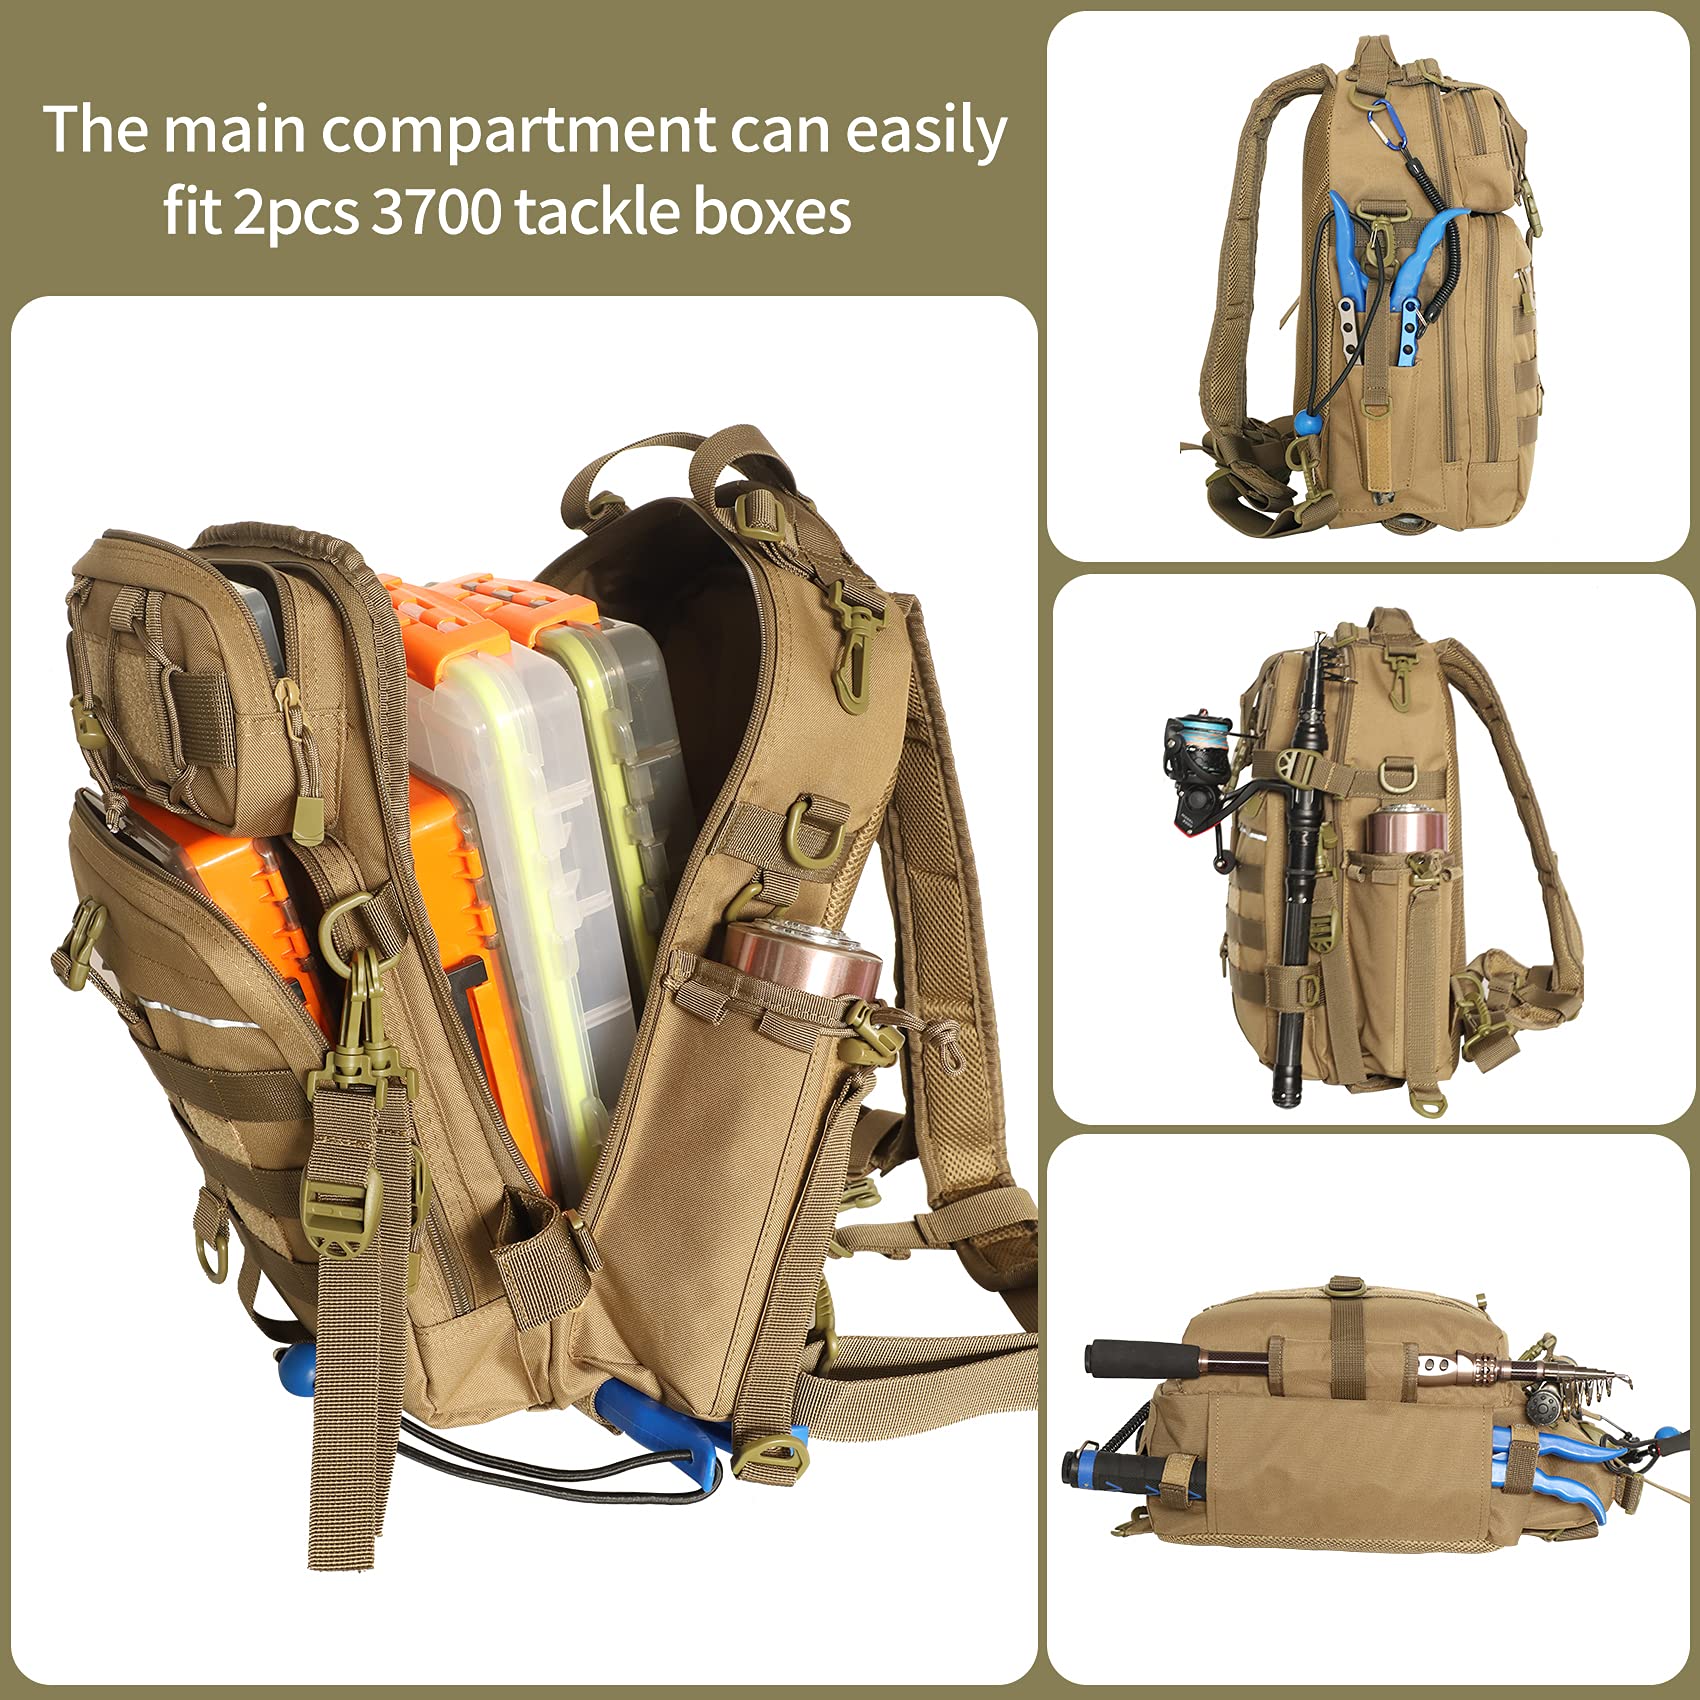 Best Fishing Tackle Backpack with Rod and Gear Holder - Ocklawaha